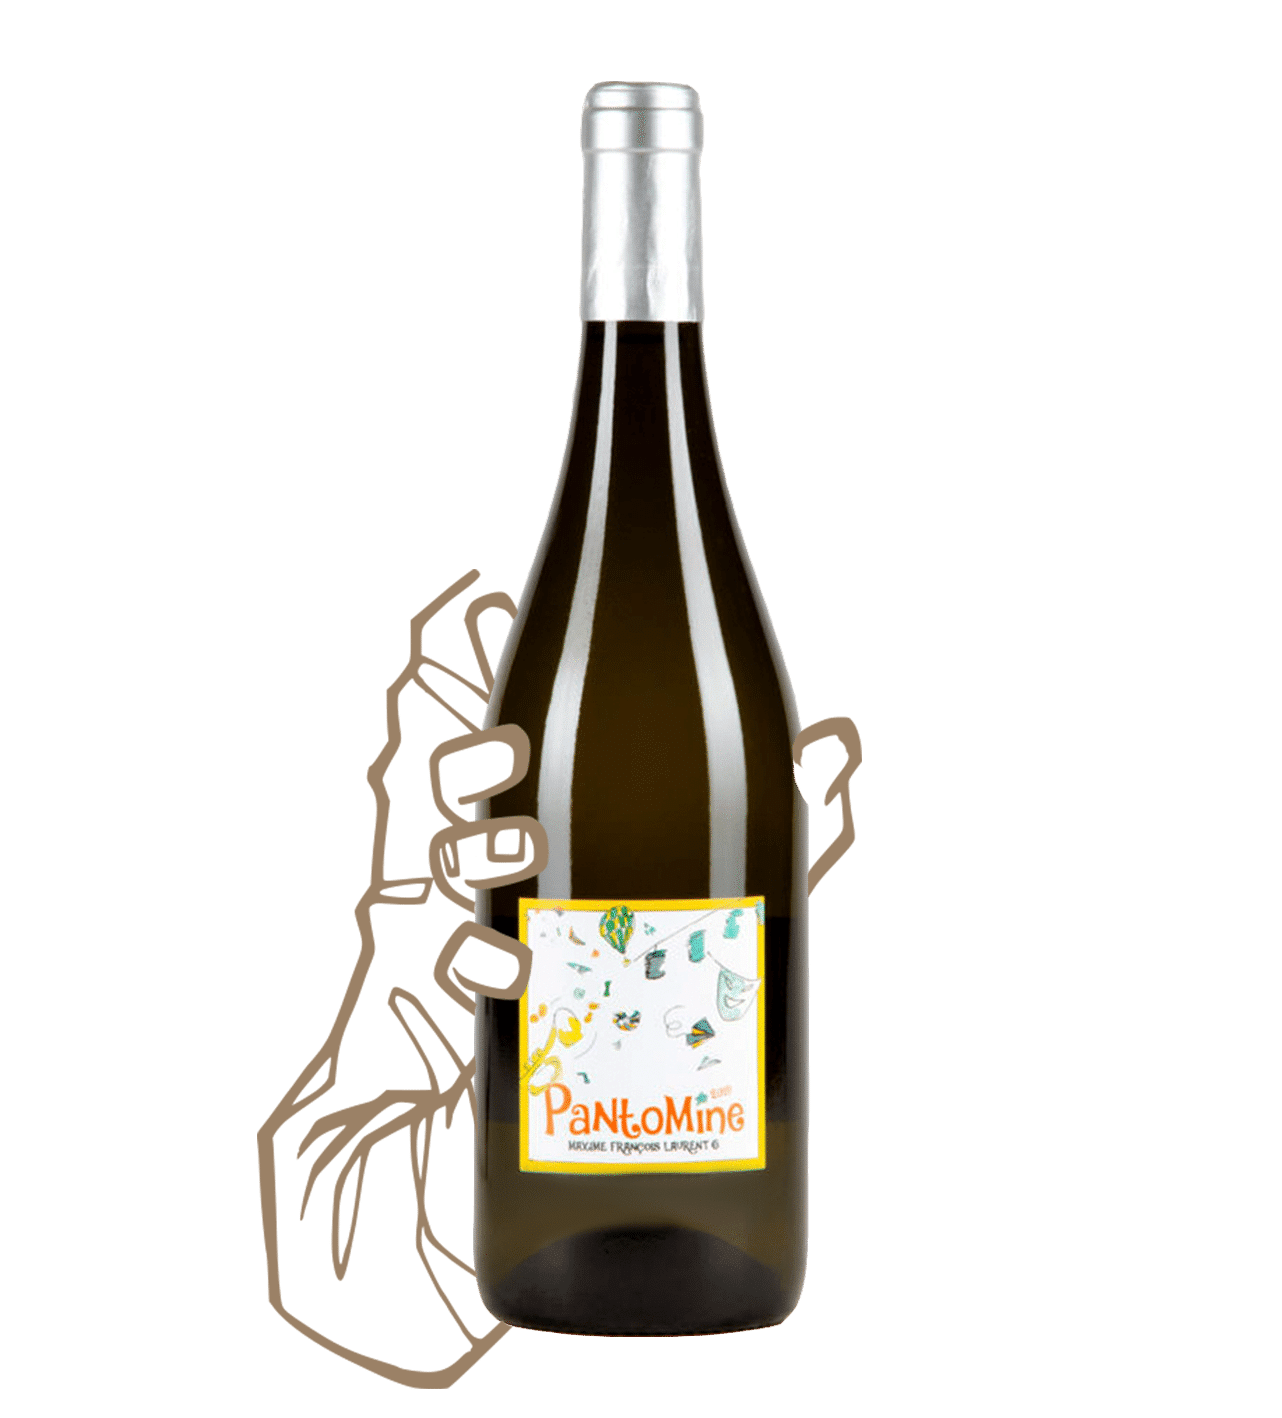 Pantomine by Maxime Laurent is a natural wine